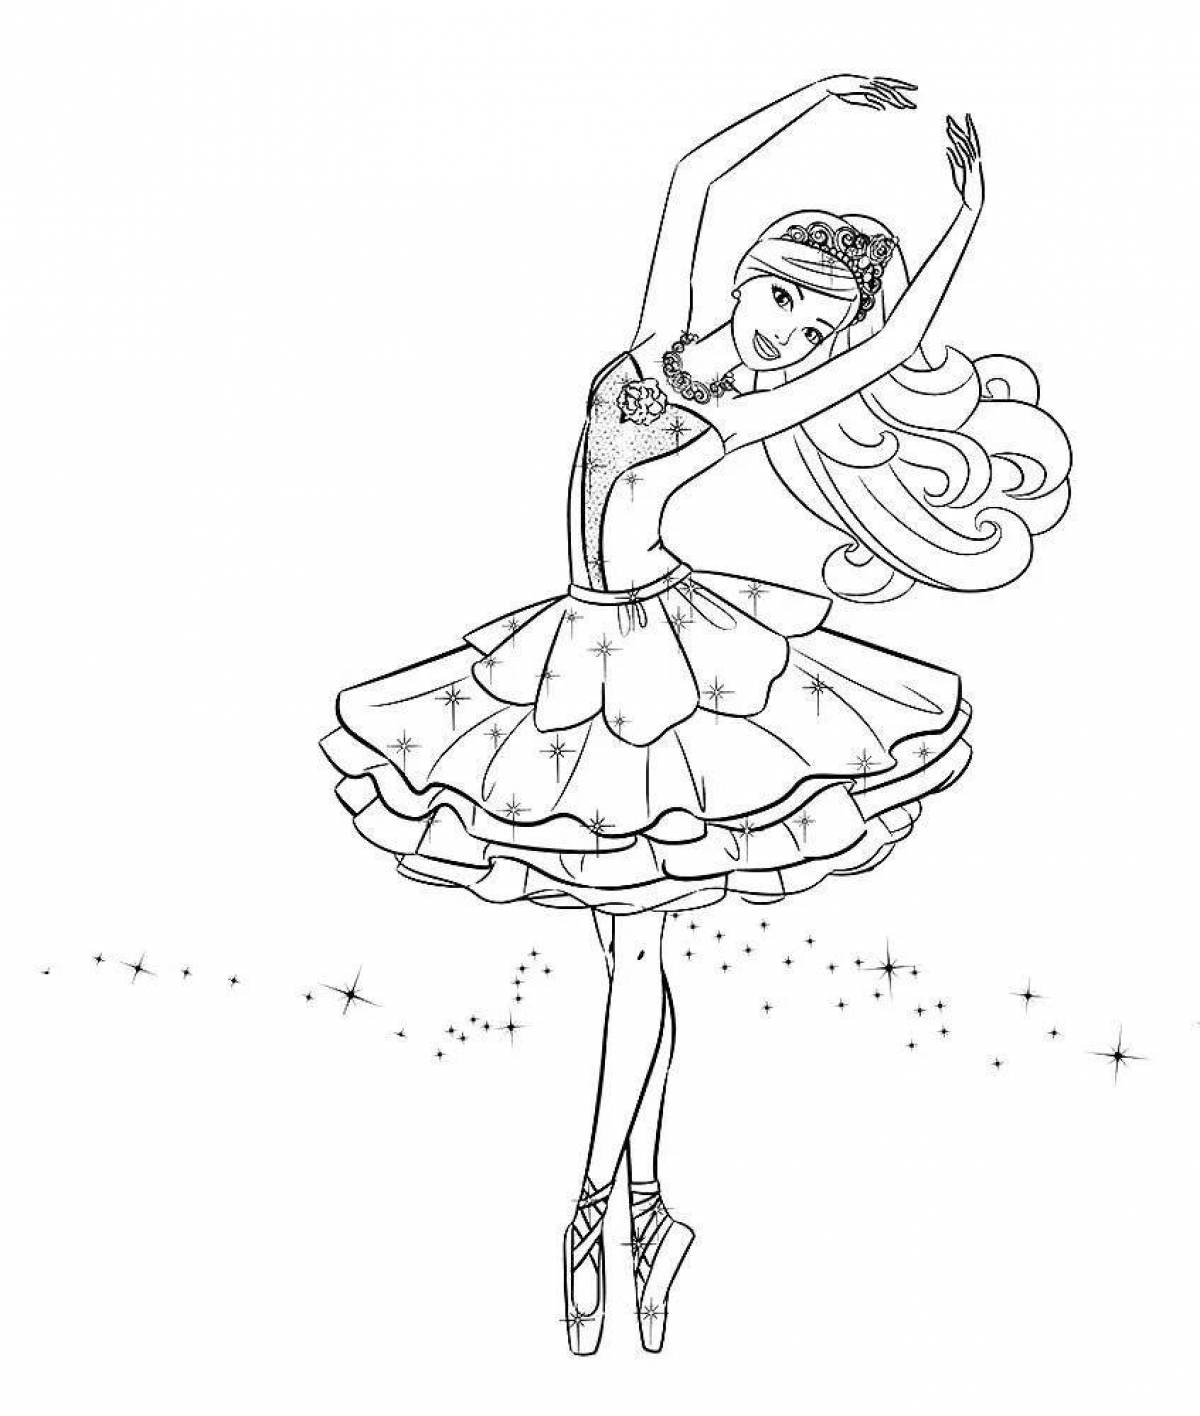 Coloring page energetic dancer